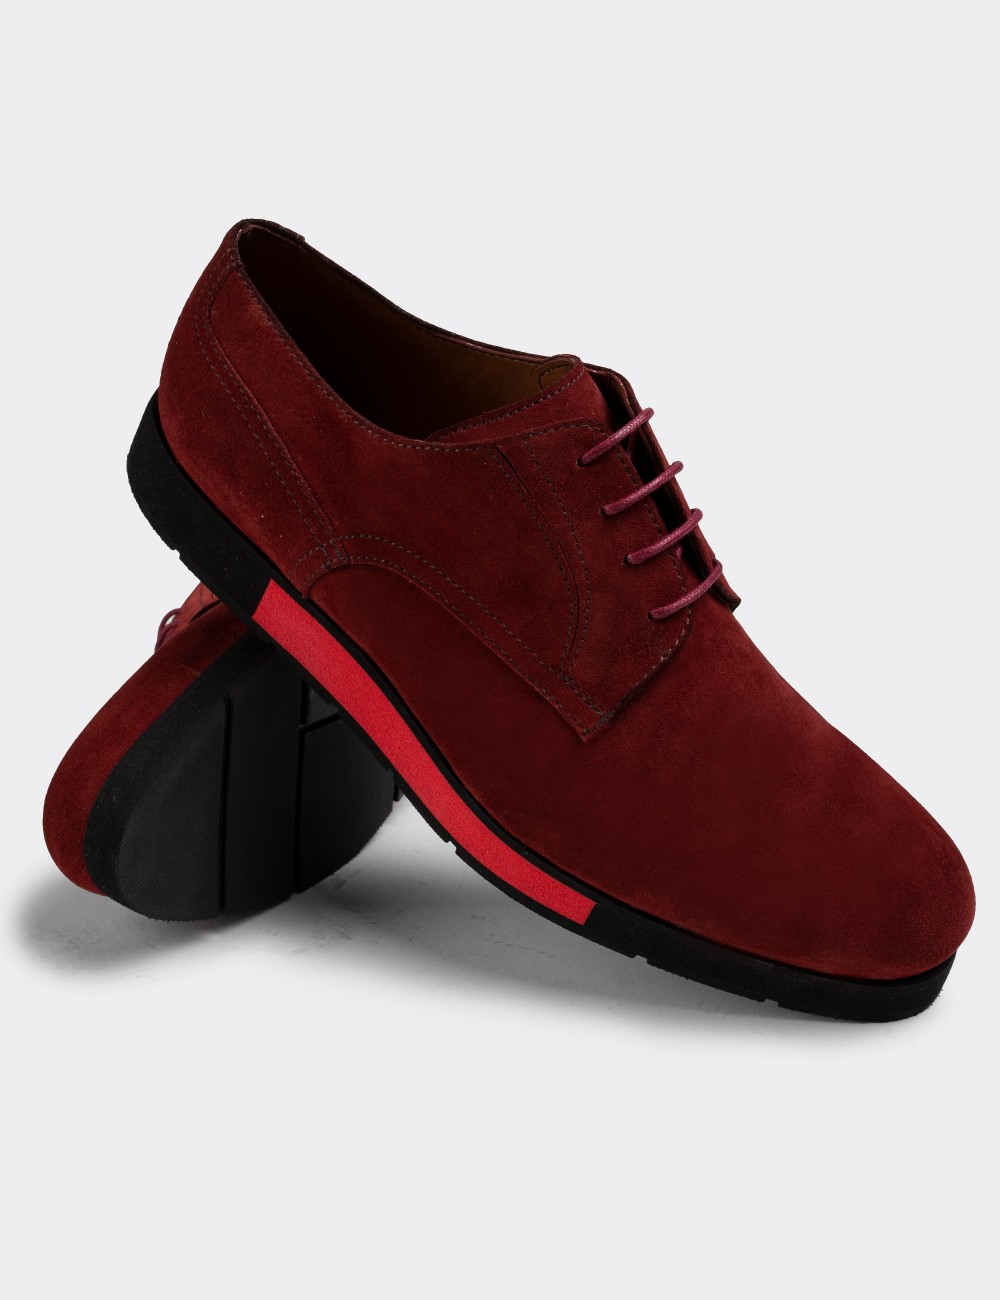 Burgundy Suede Leather Lace-up Shoes - 01294MBRDE10